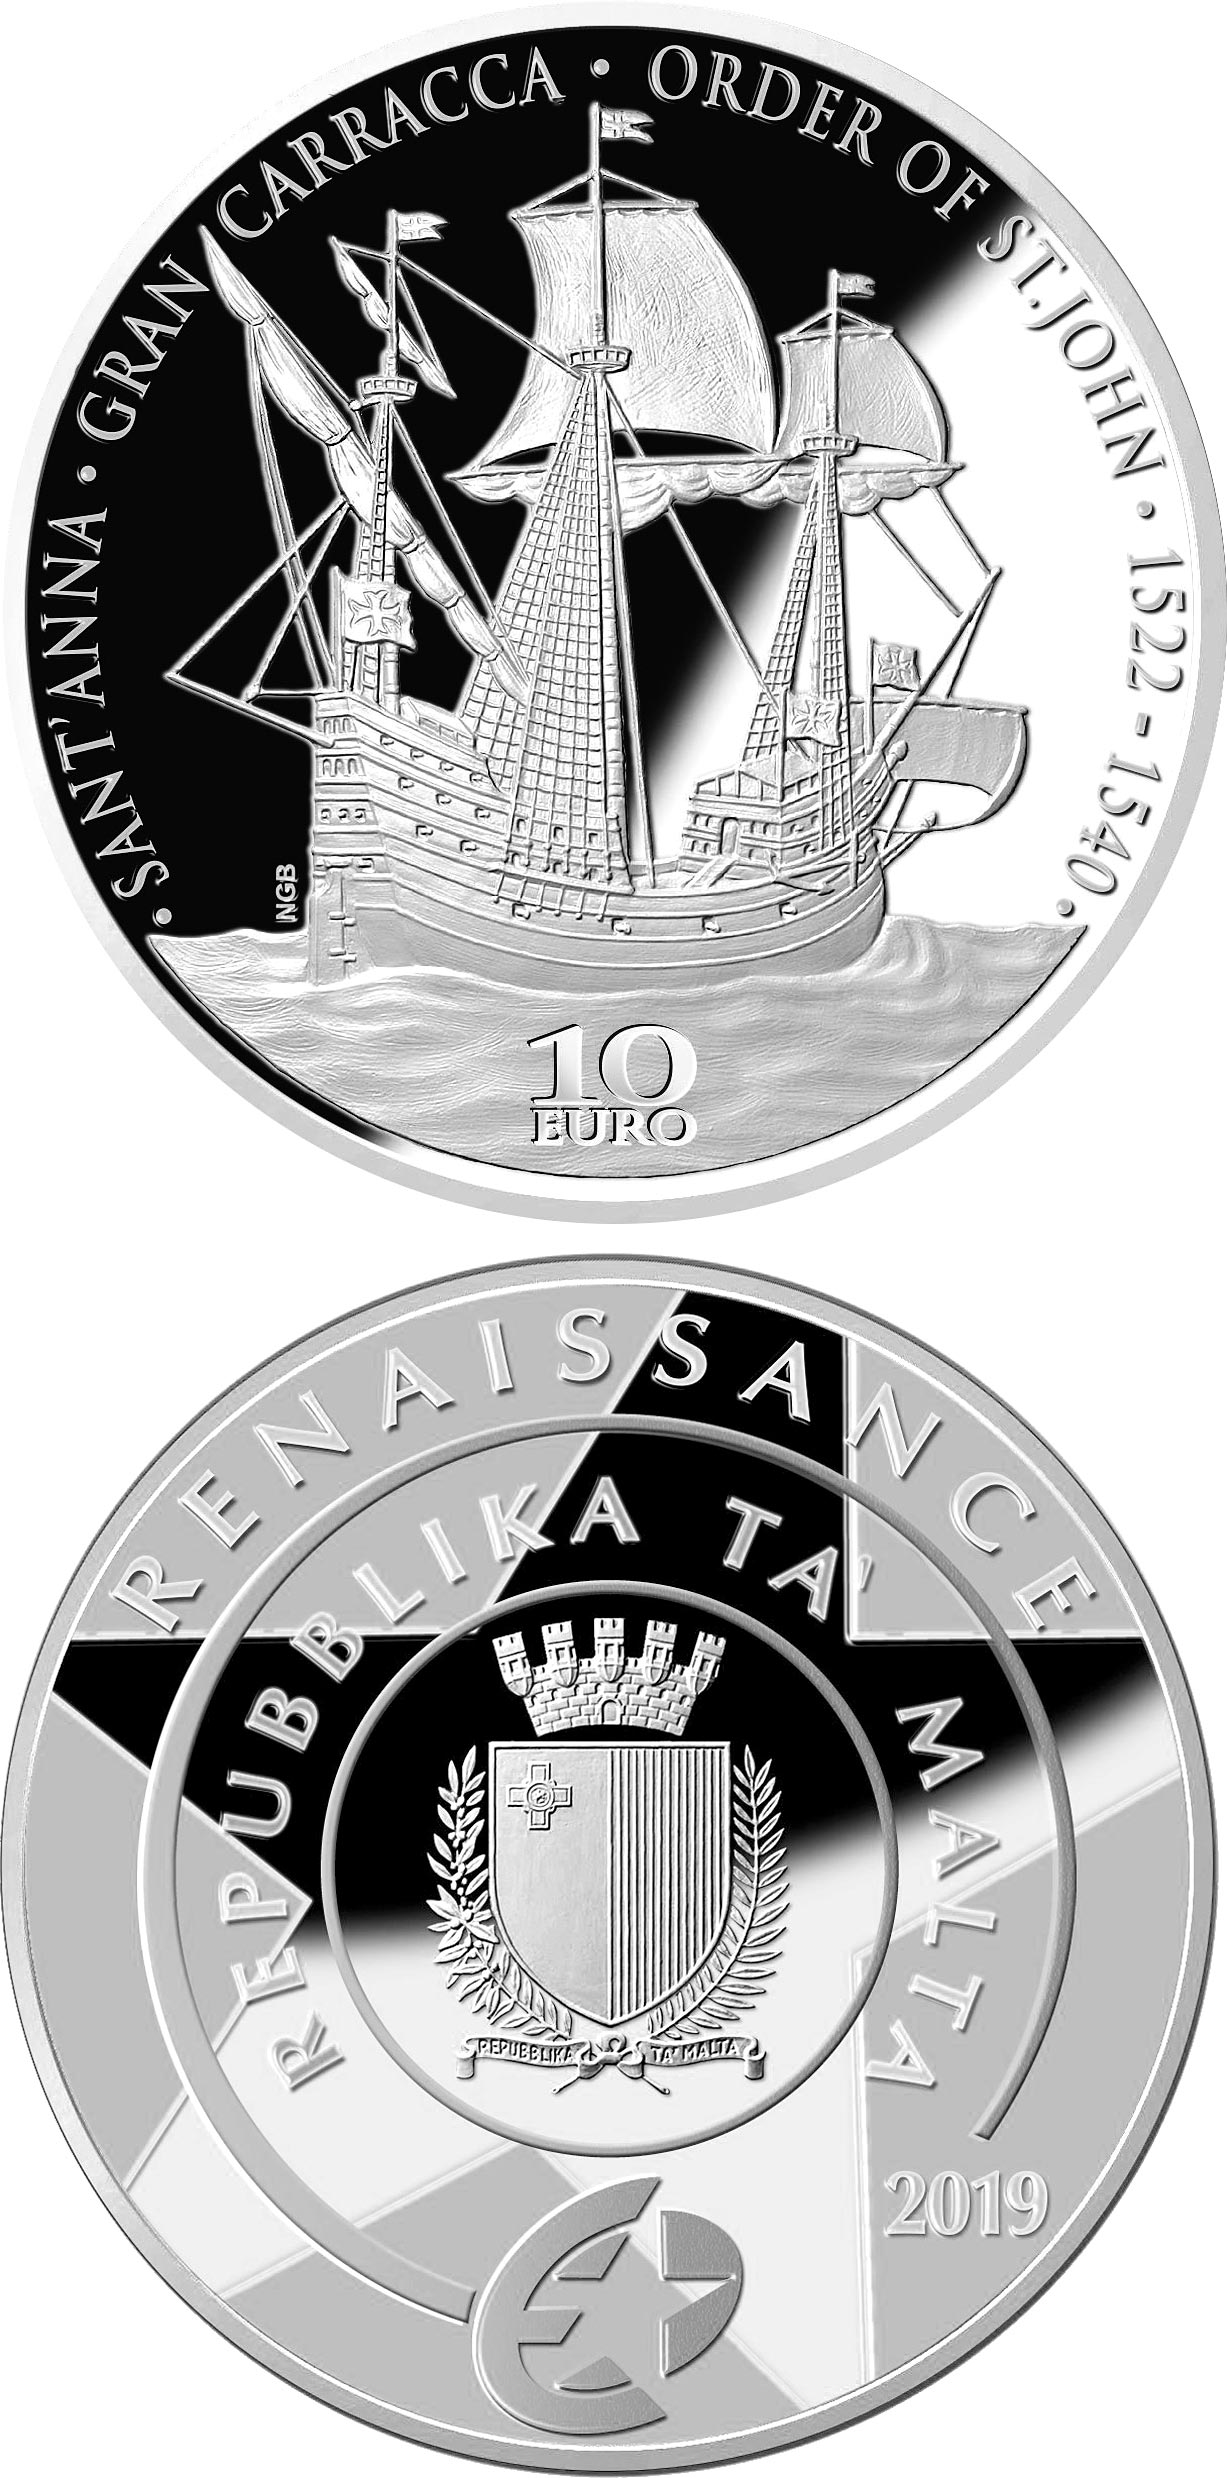 Image of 10 euro coin - The Gran Carracca of the Order of St John | Malta 2019.  The Silver coin is of Proof quality.